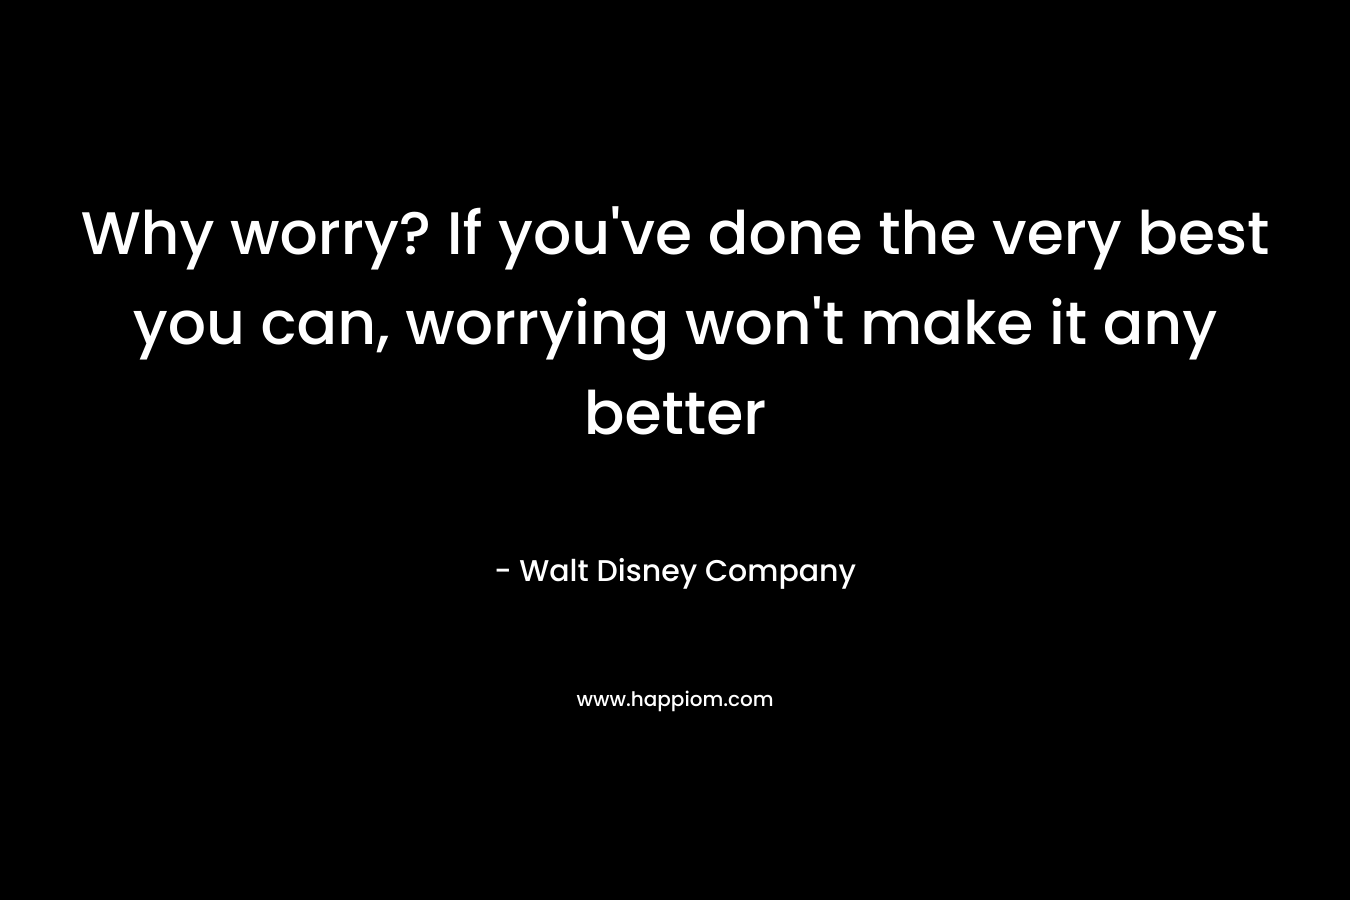 Why worry? If you’ve done the very best you can, worrying won’t make it any better – Walt Disney Company